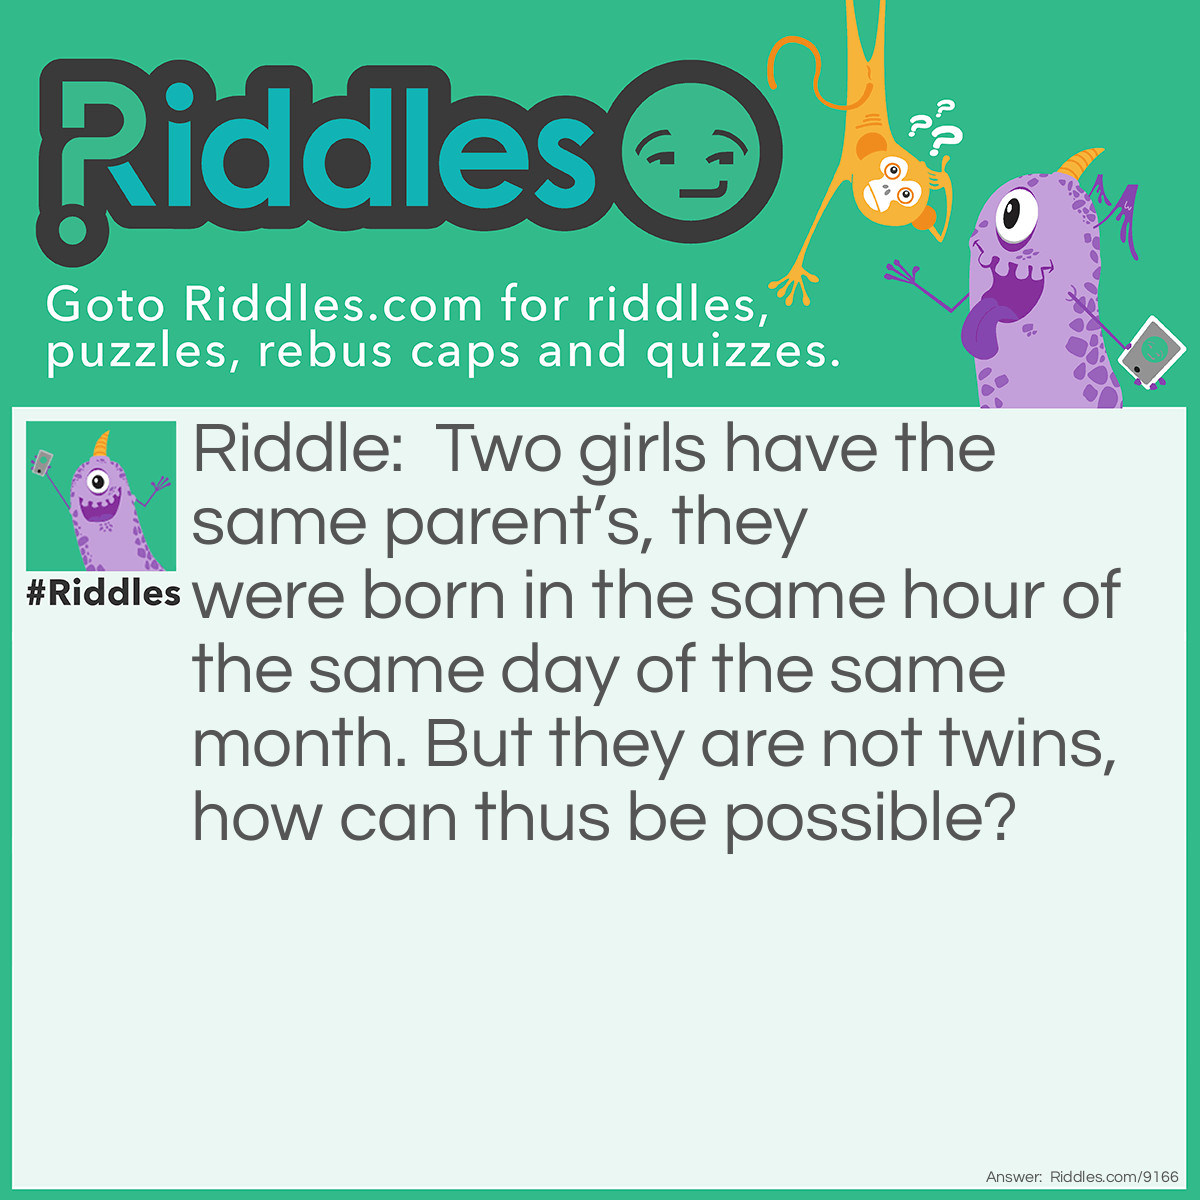 Riddle: Two girls have the same parent's, they were born in the same hour of the same day of the same month. But they are not twins, how can thus be possible? Answer: They were born in different years.